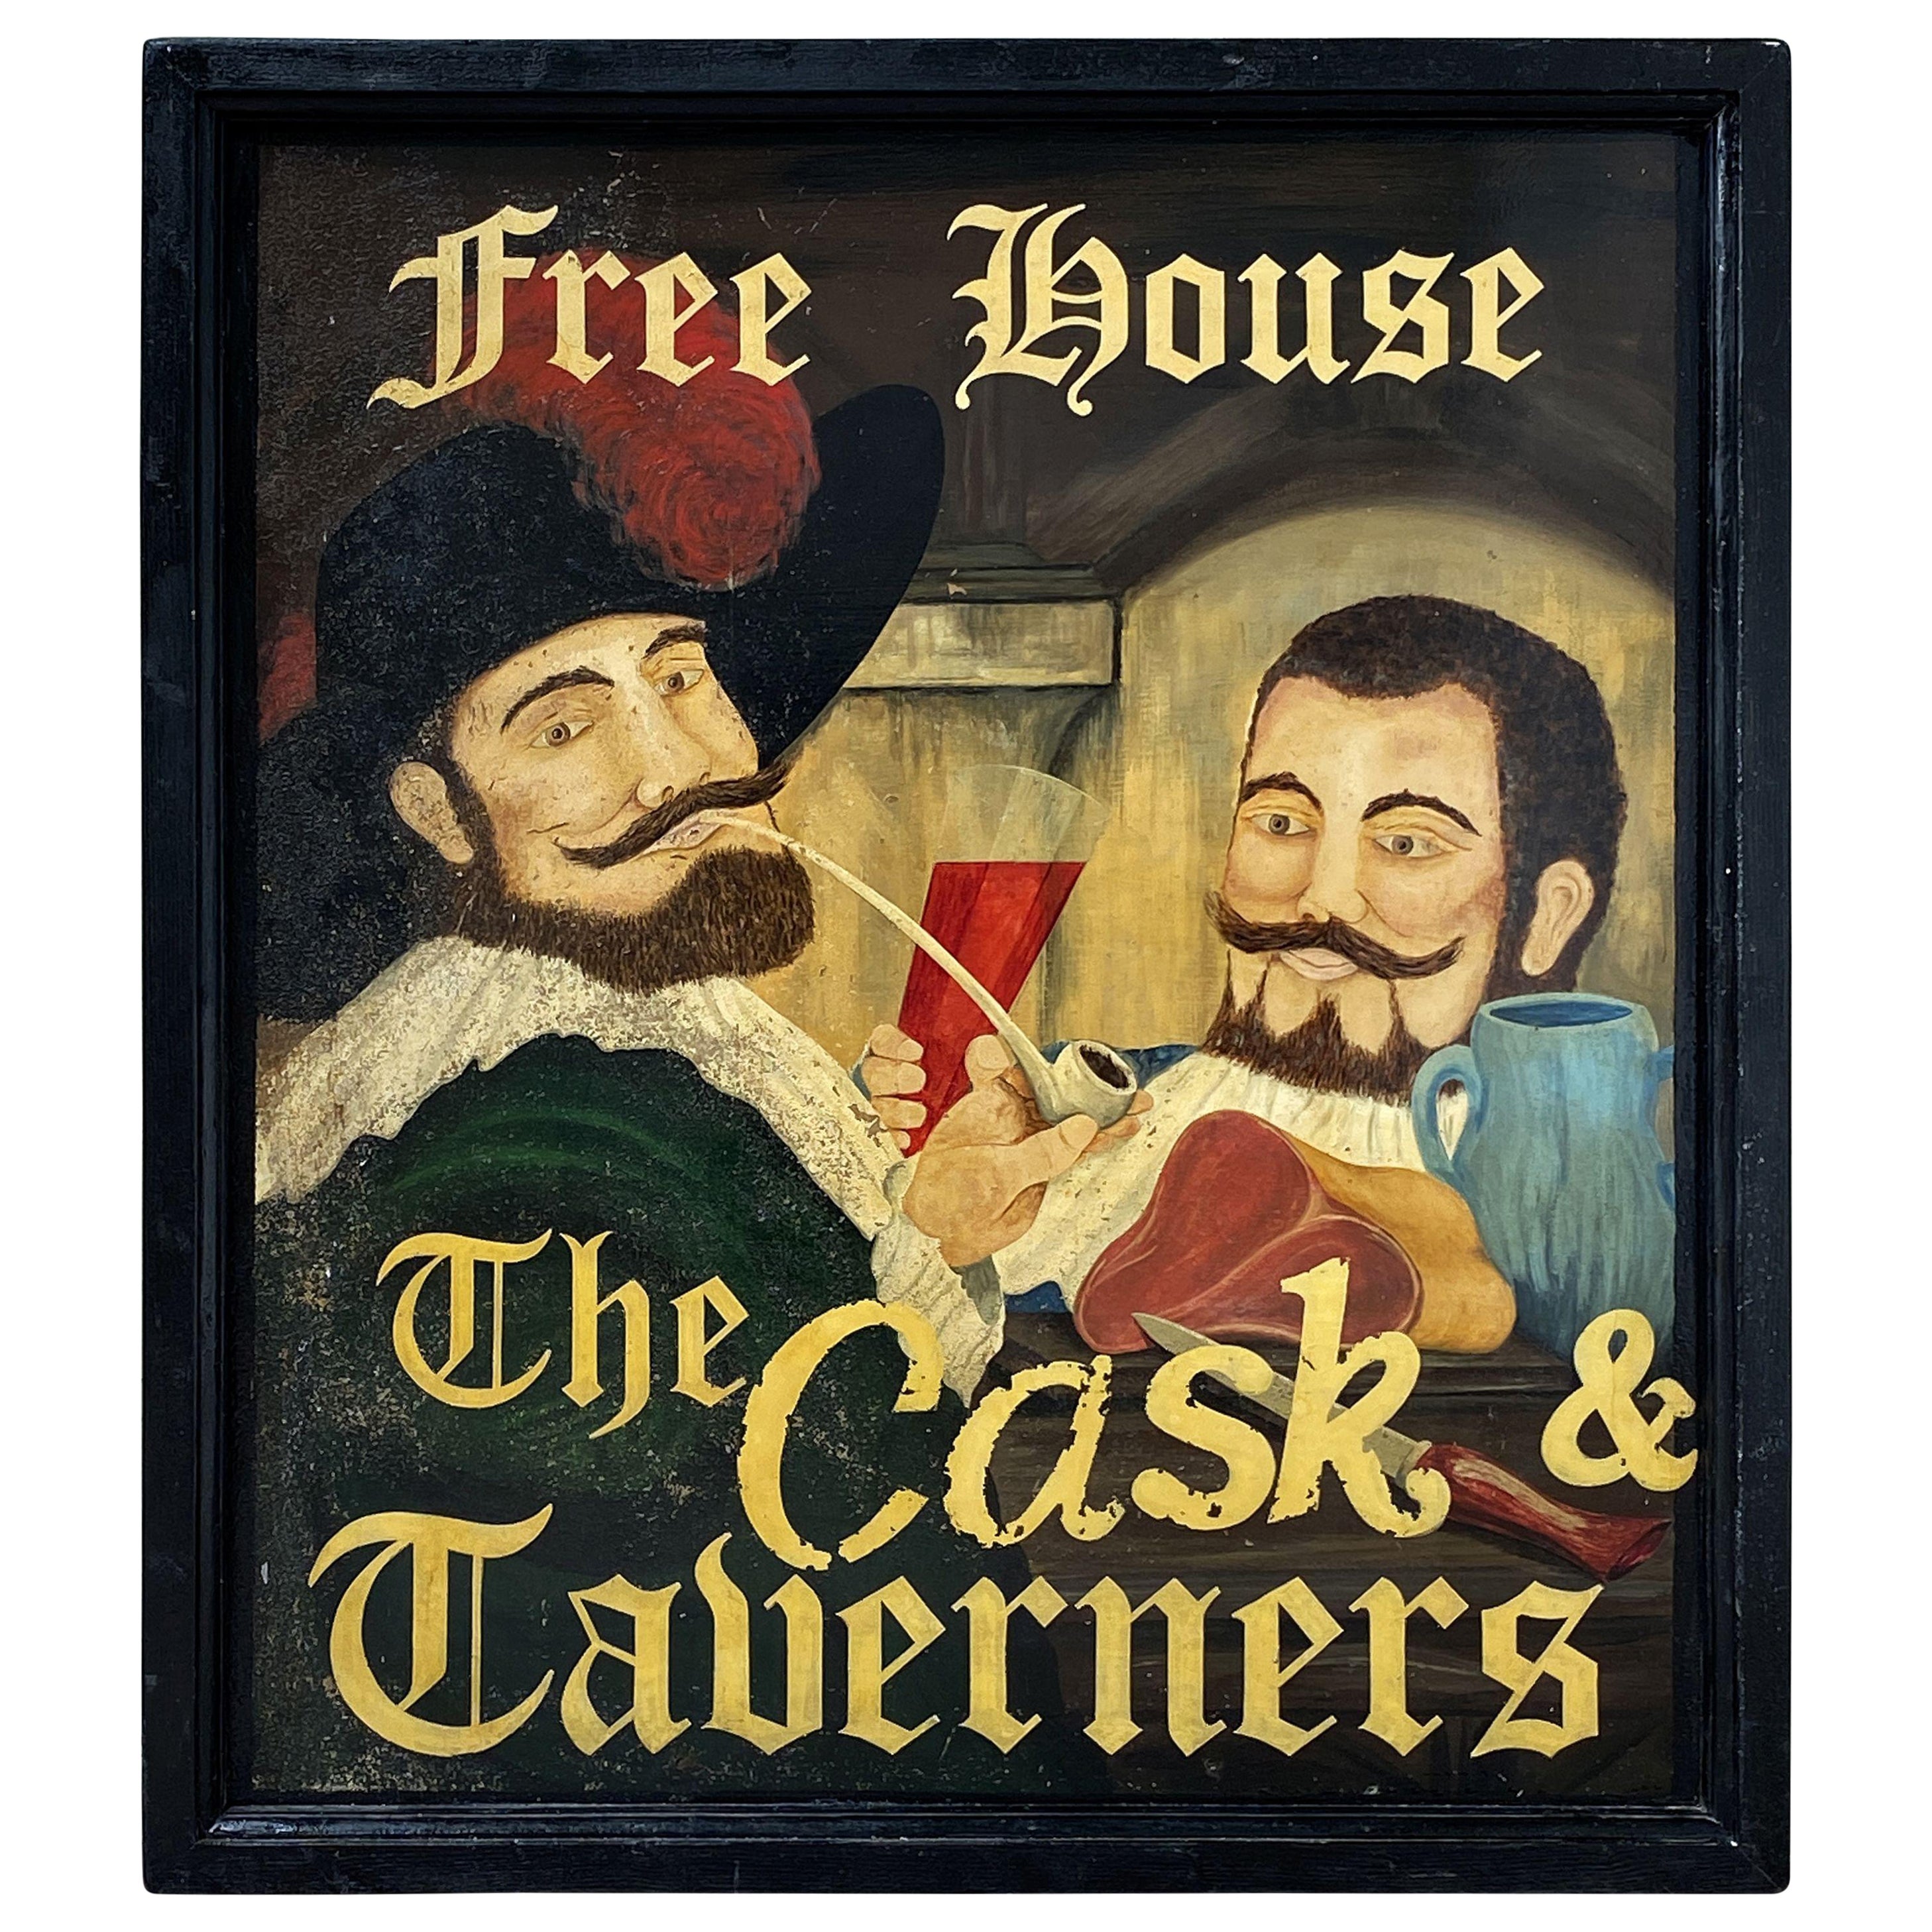 English Pub Sign, "Free House, The Cask and Taverners" For Sale